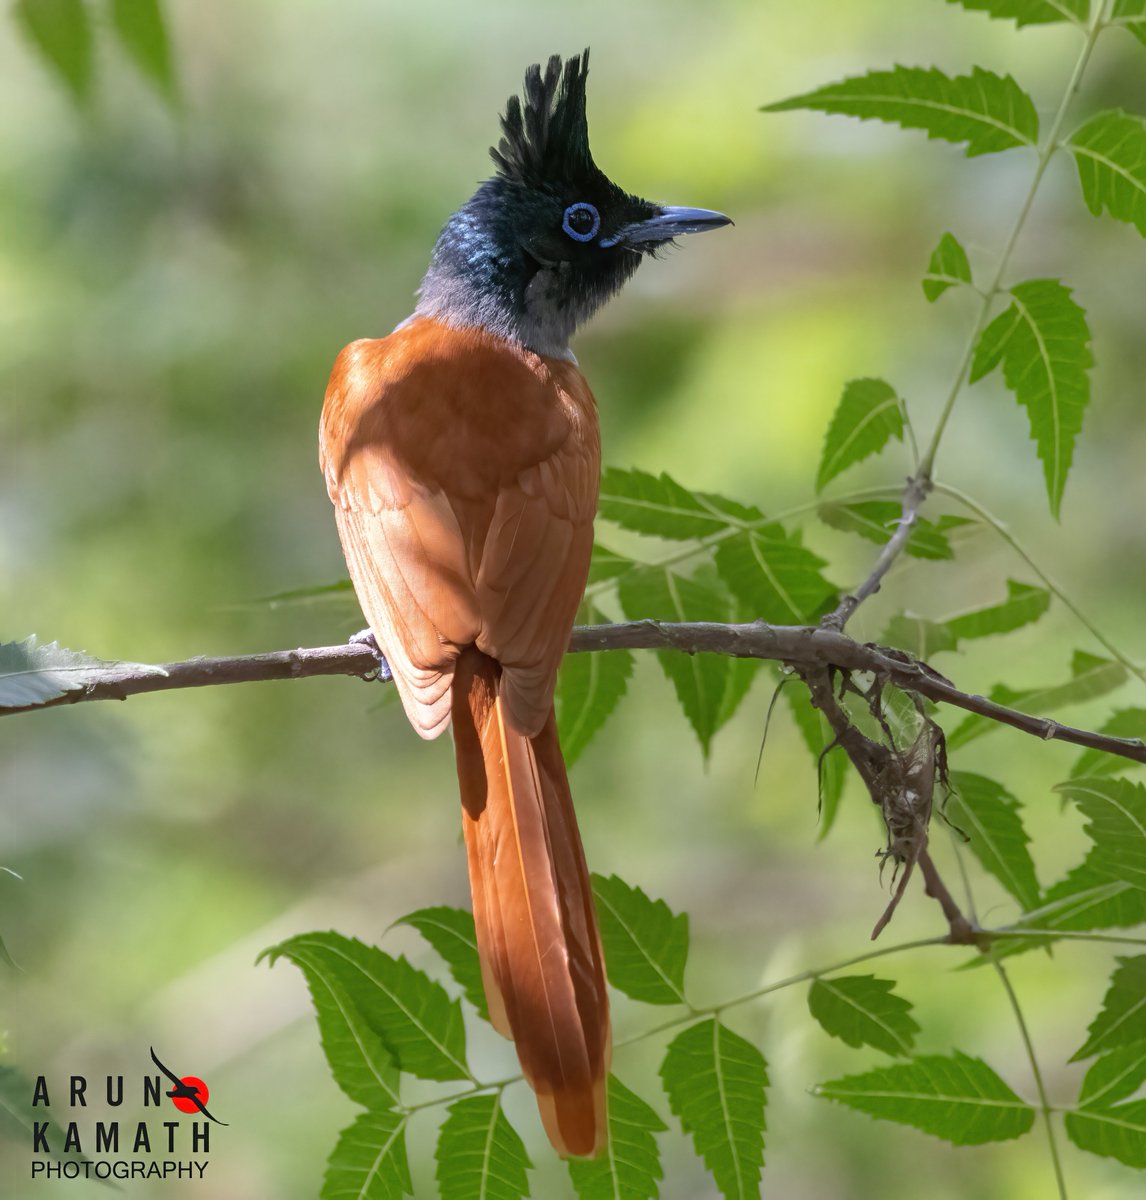 Love the way it shows of the crest and the look of The Indian Paradise Flycatcher female. The summer heat is too much now at 43c and no birding for few days as morning also its 30+ #indiaves #twitternaturecommunity #birds #thephotohour